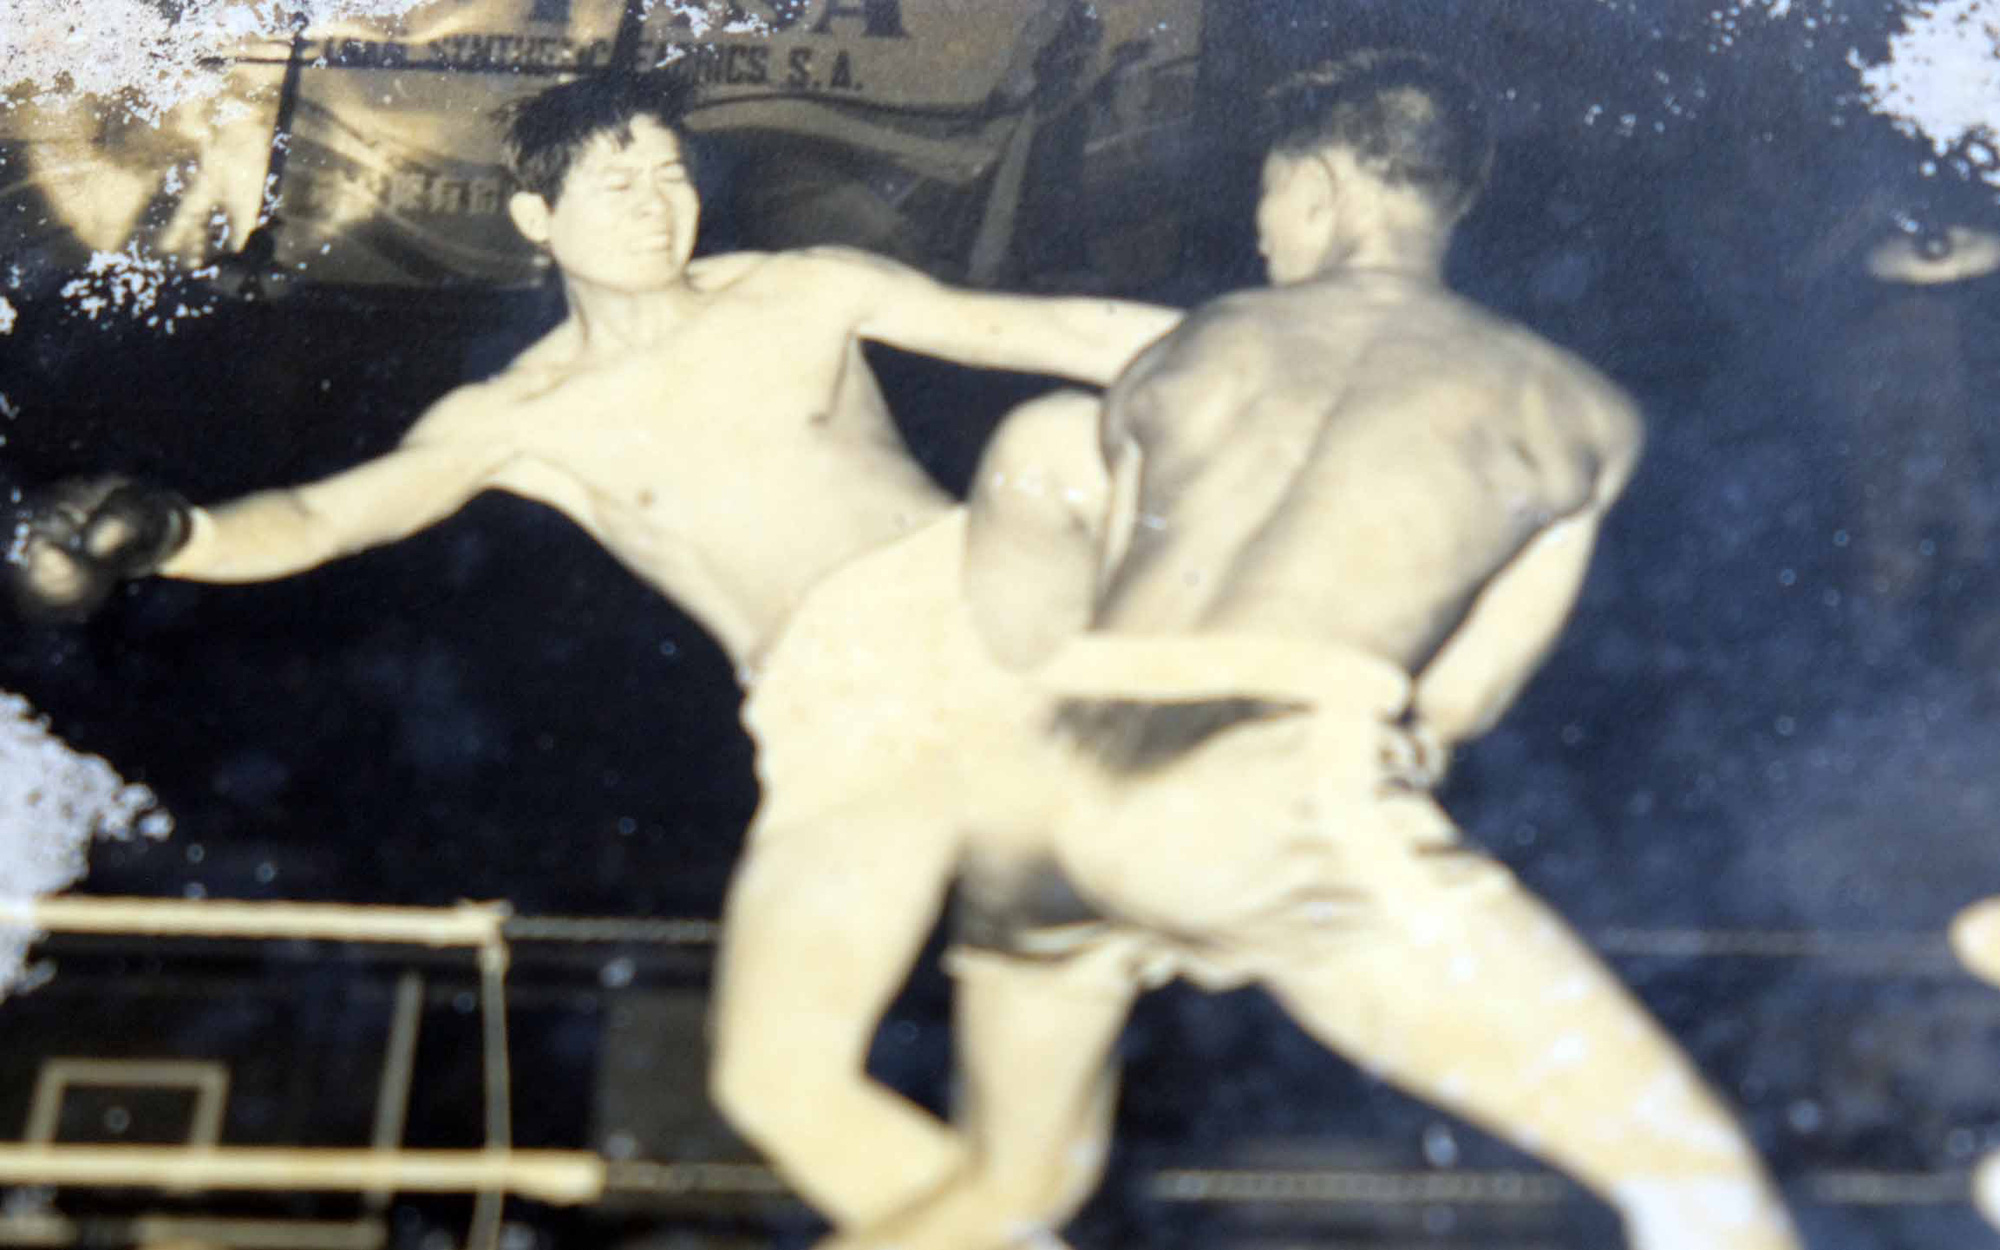 Fighting rings once popular public events in Vietnam’s Mekong Delta